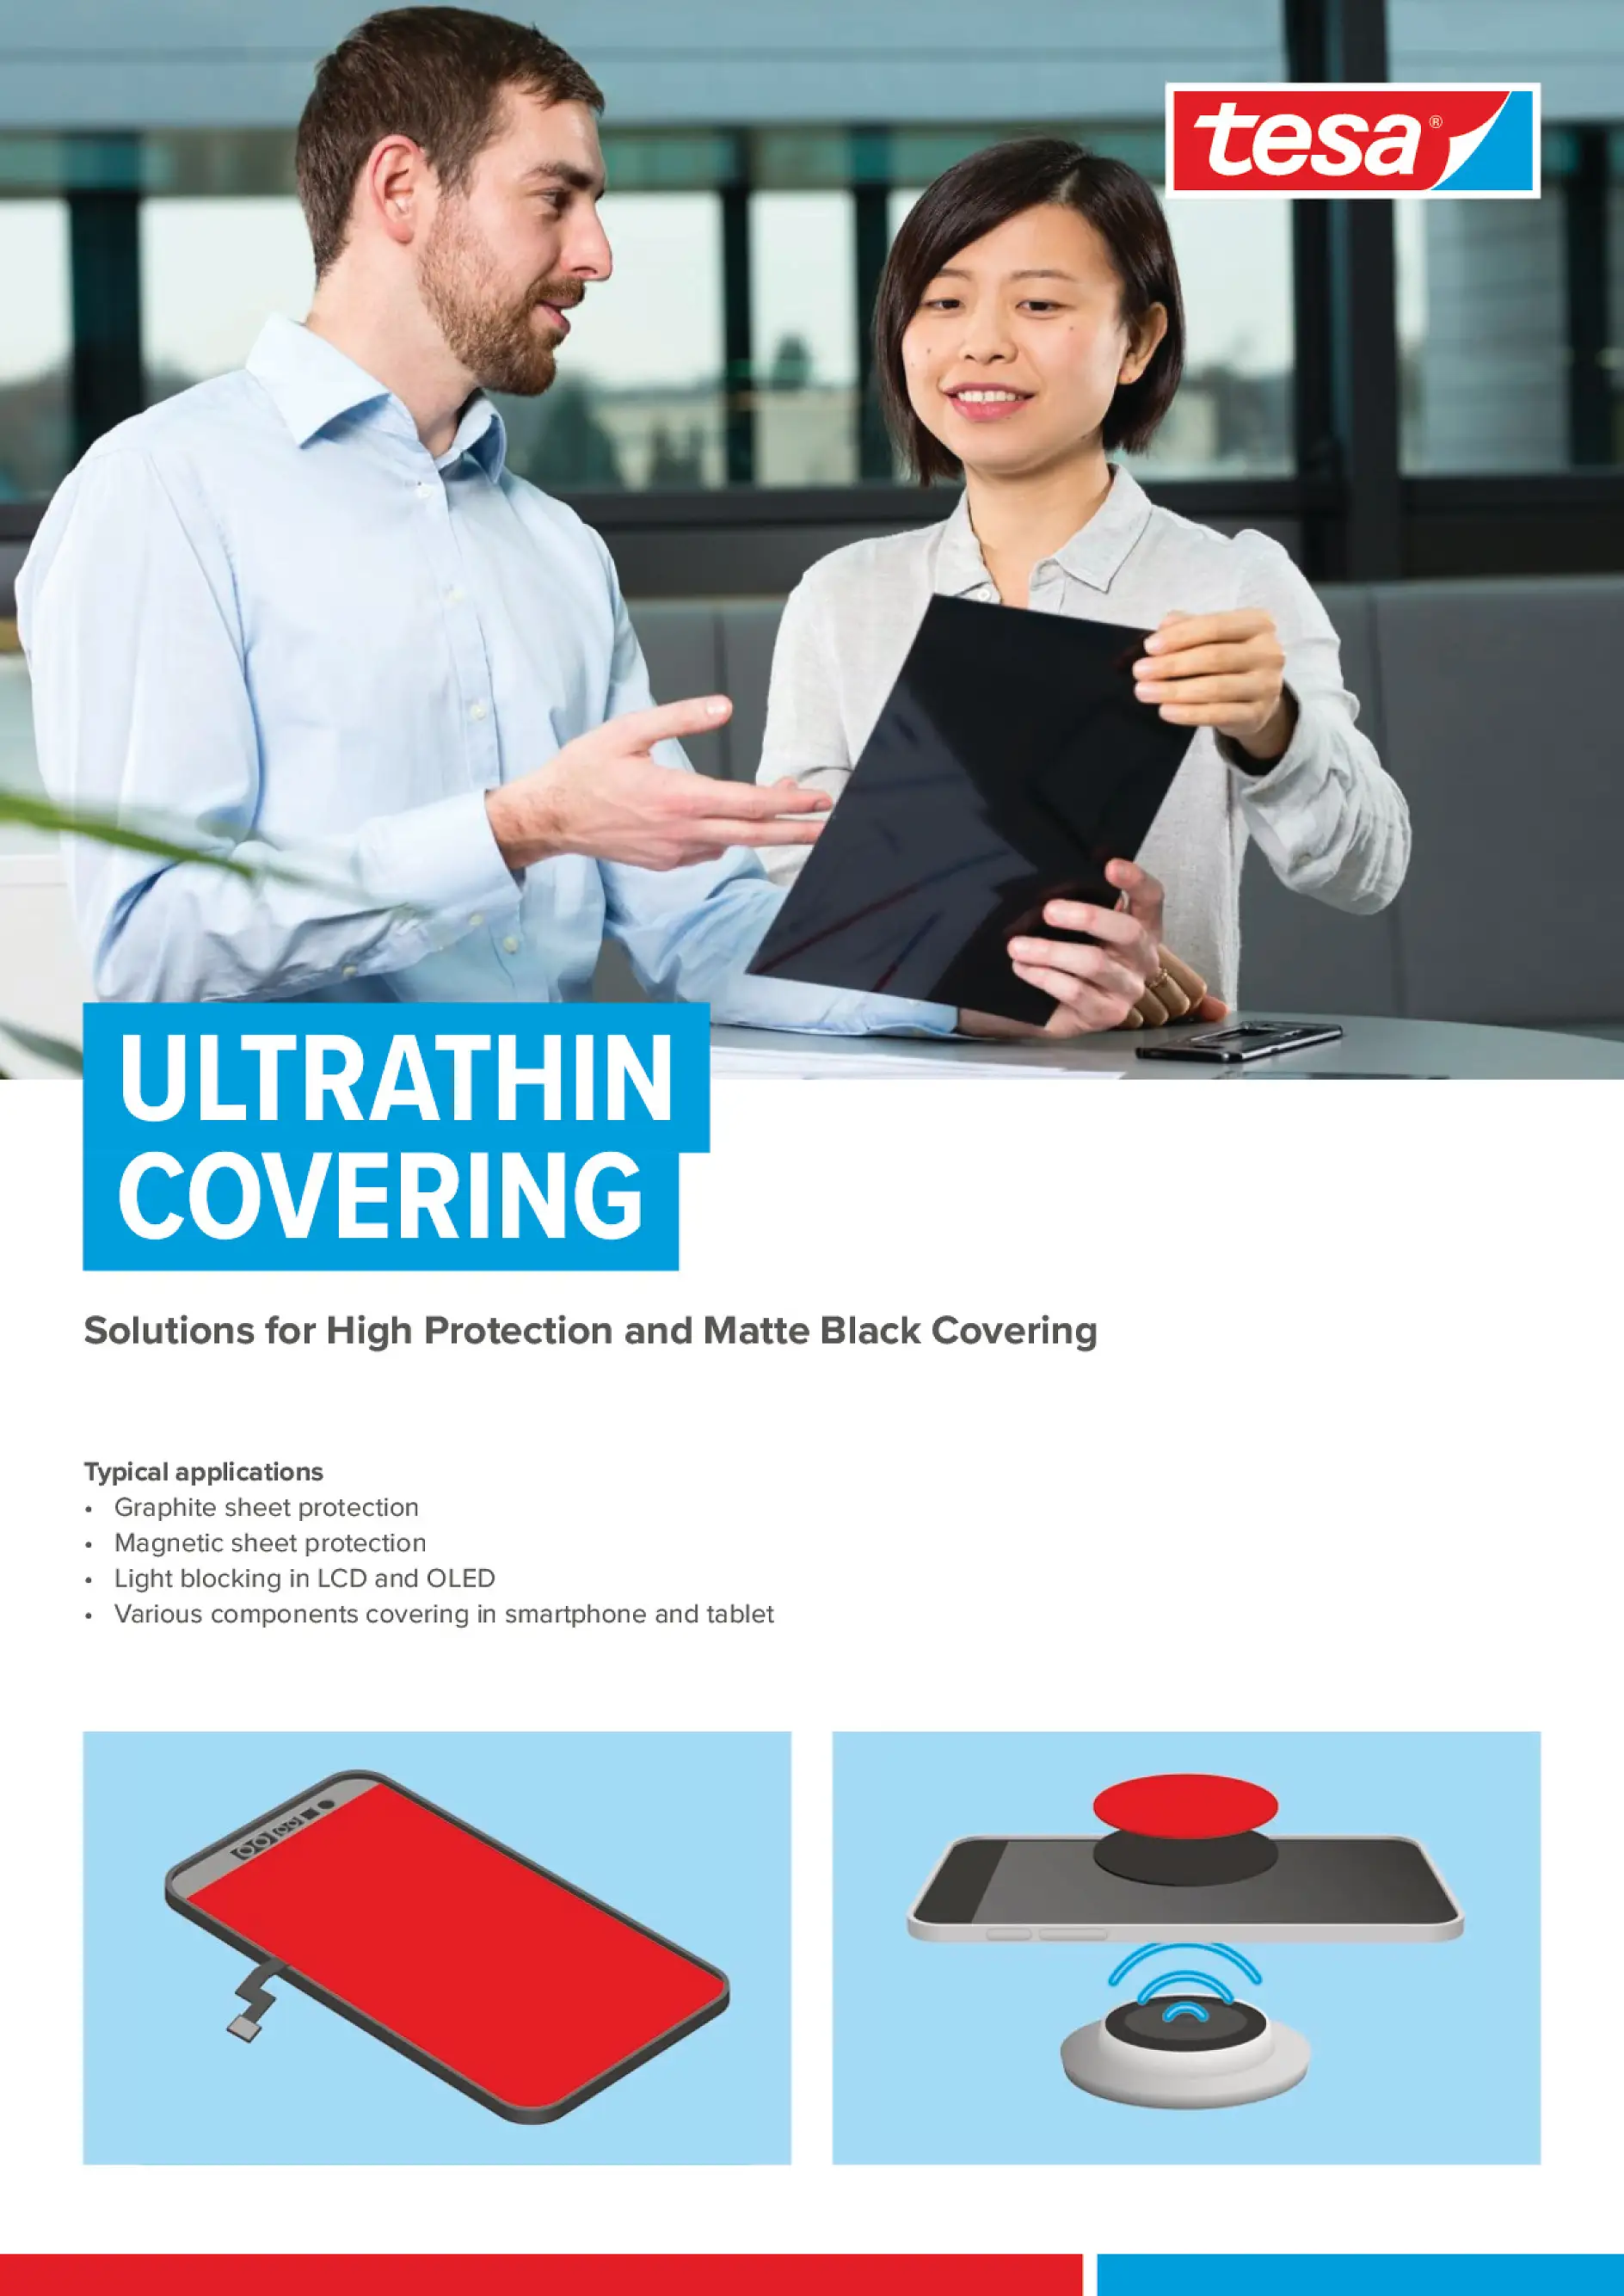 te19_0602_Electronics_2Pager_Ultrathin_Covering_Final_20190611_web